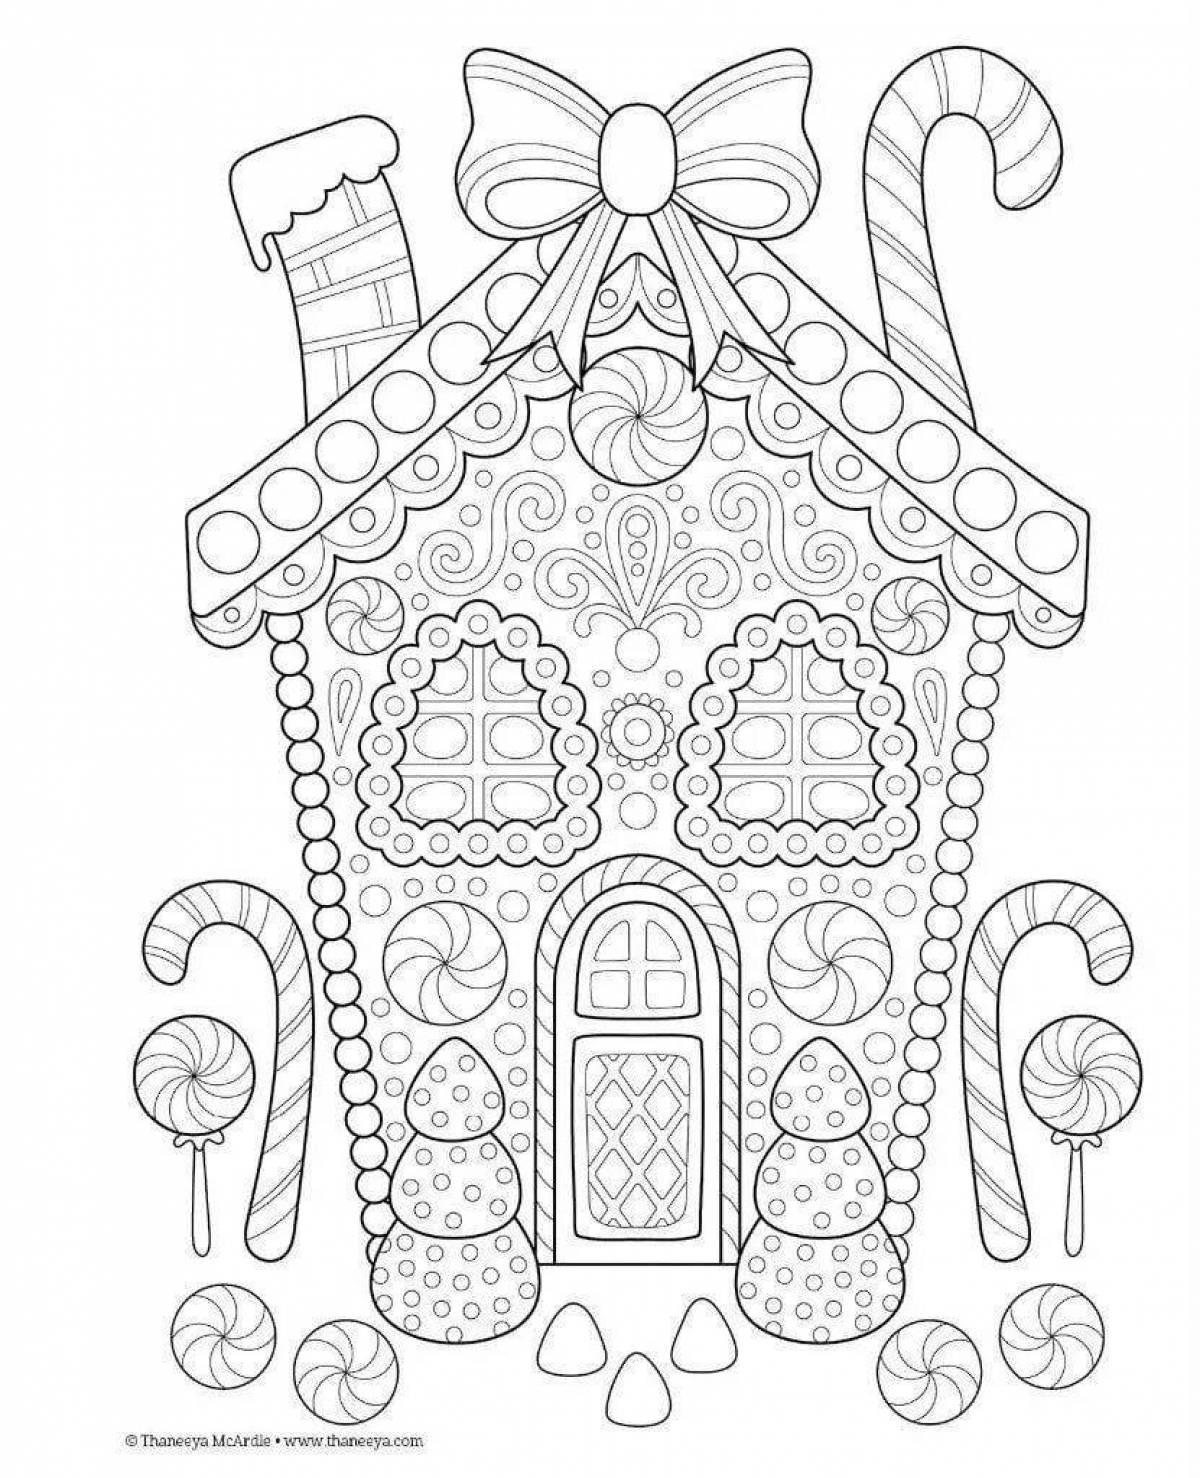 Fairy gingerbread house glitter coloring book